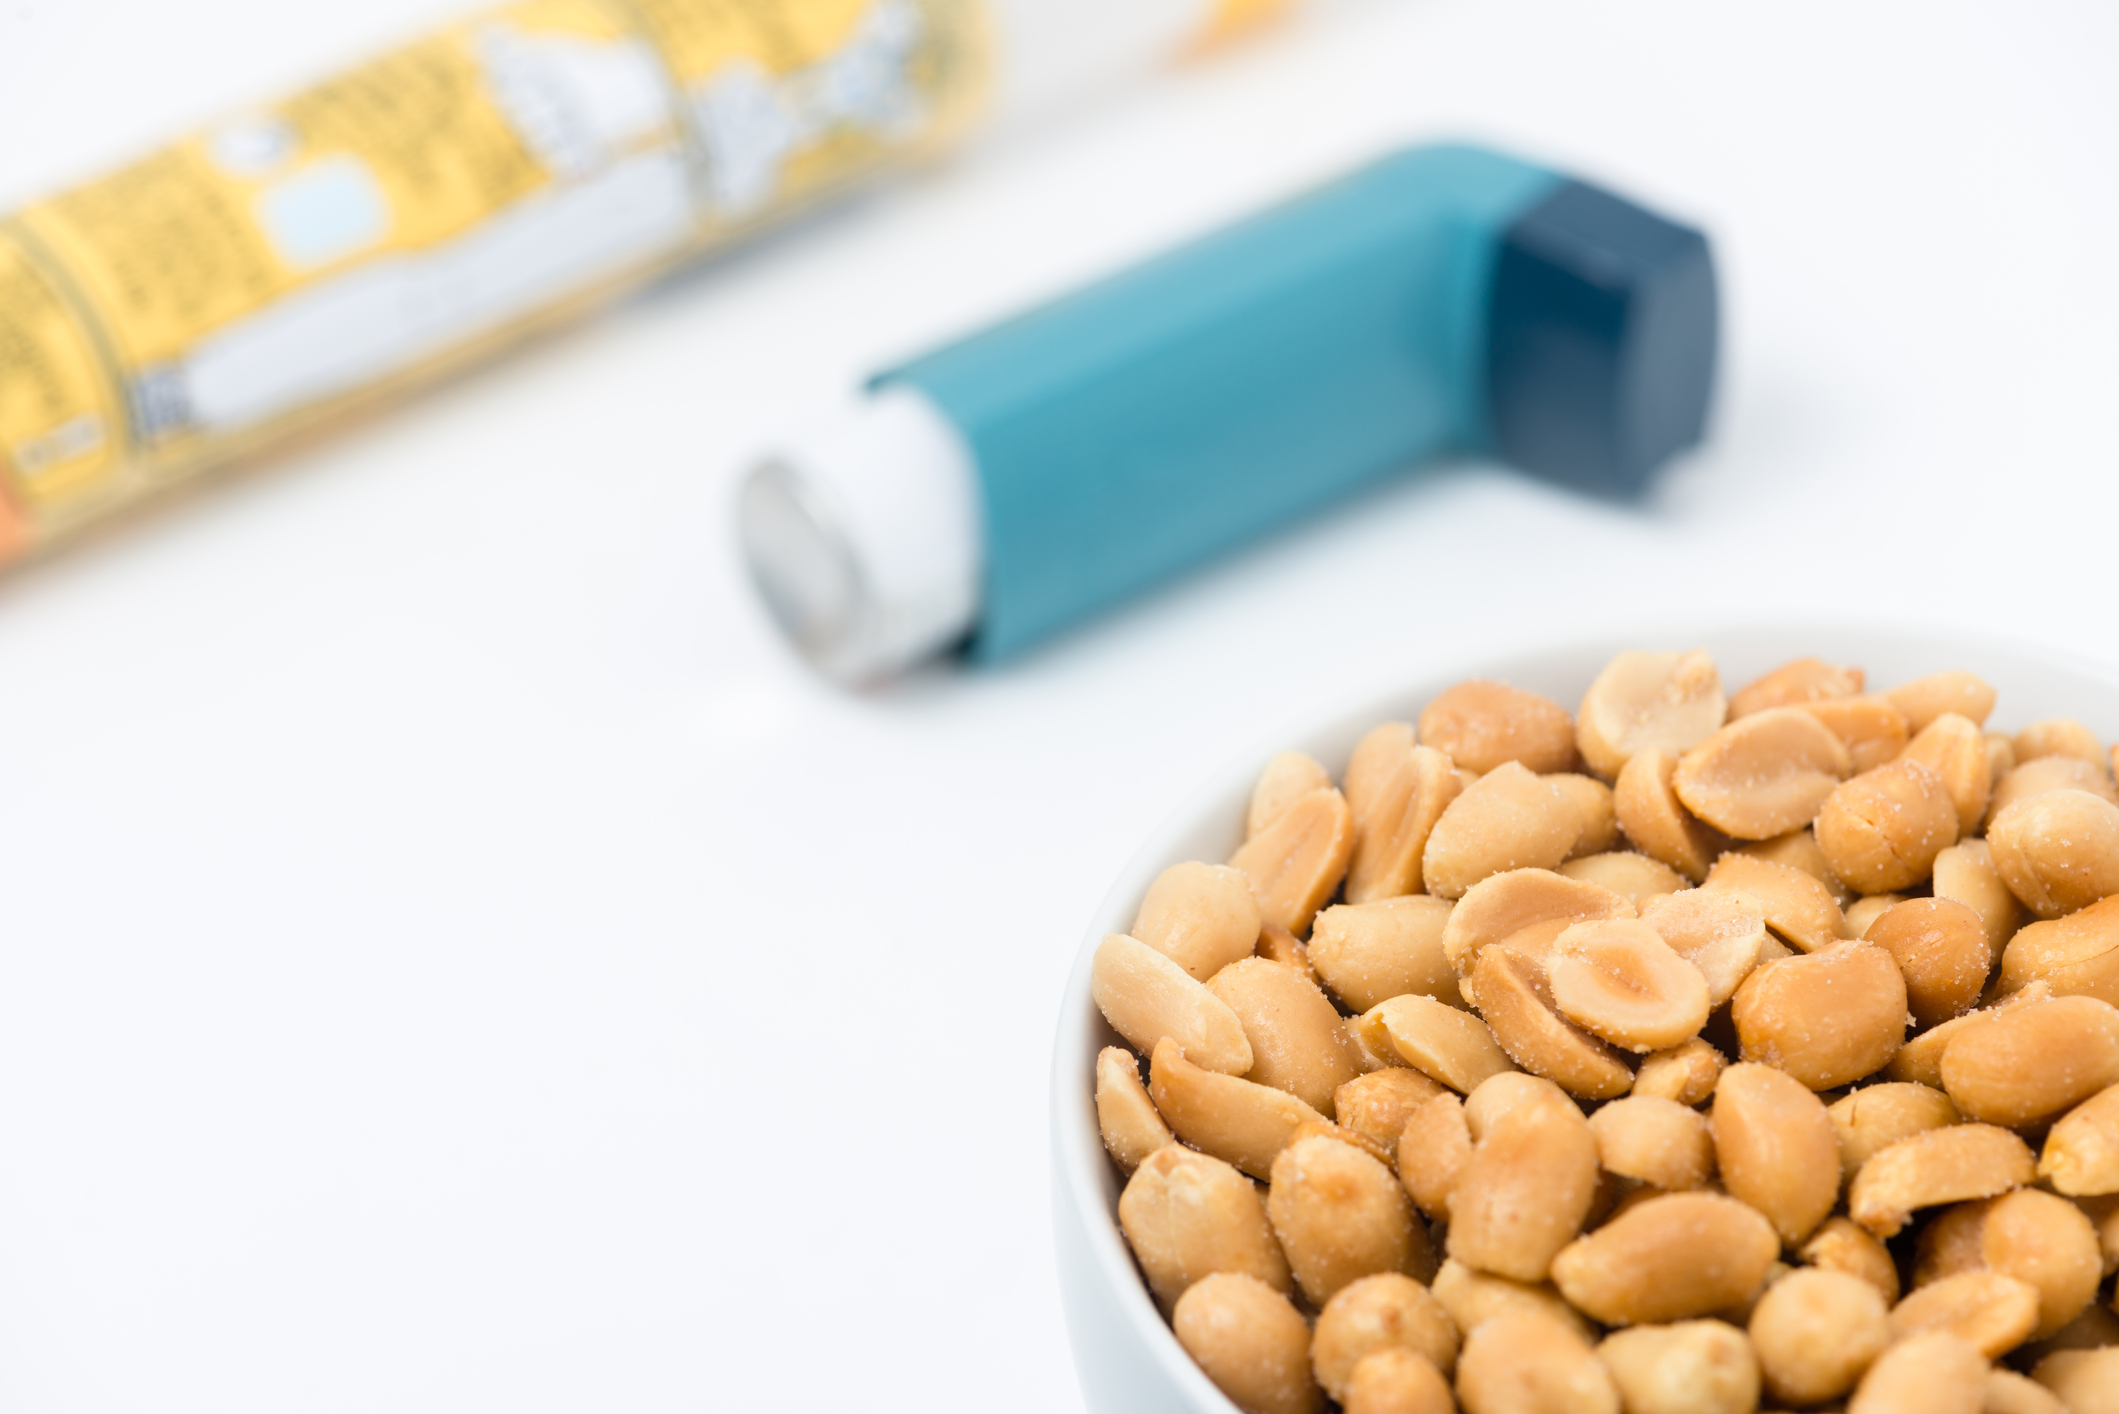 Salted Peanuts and Allergy Medication